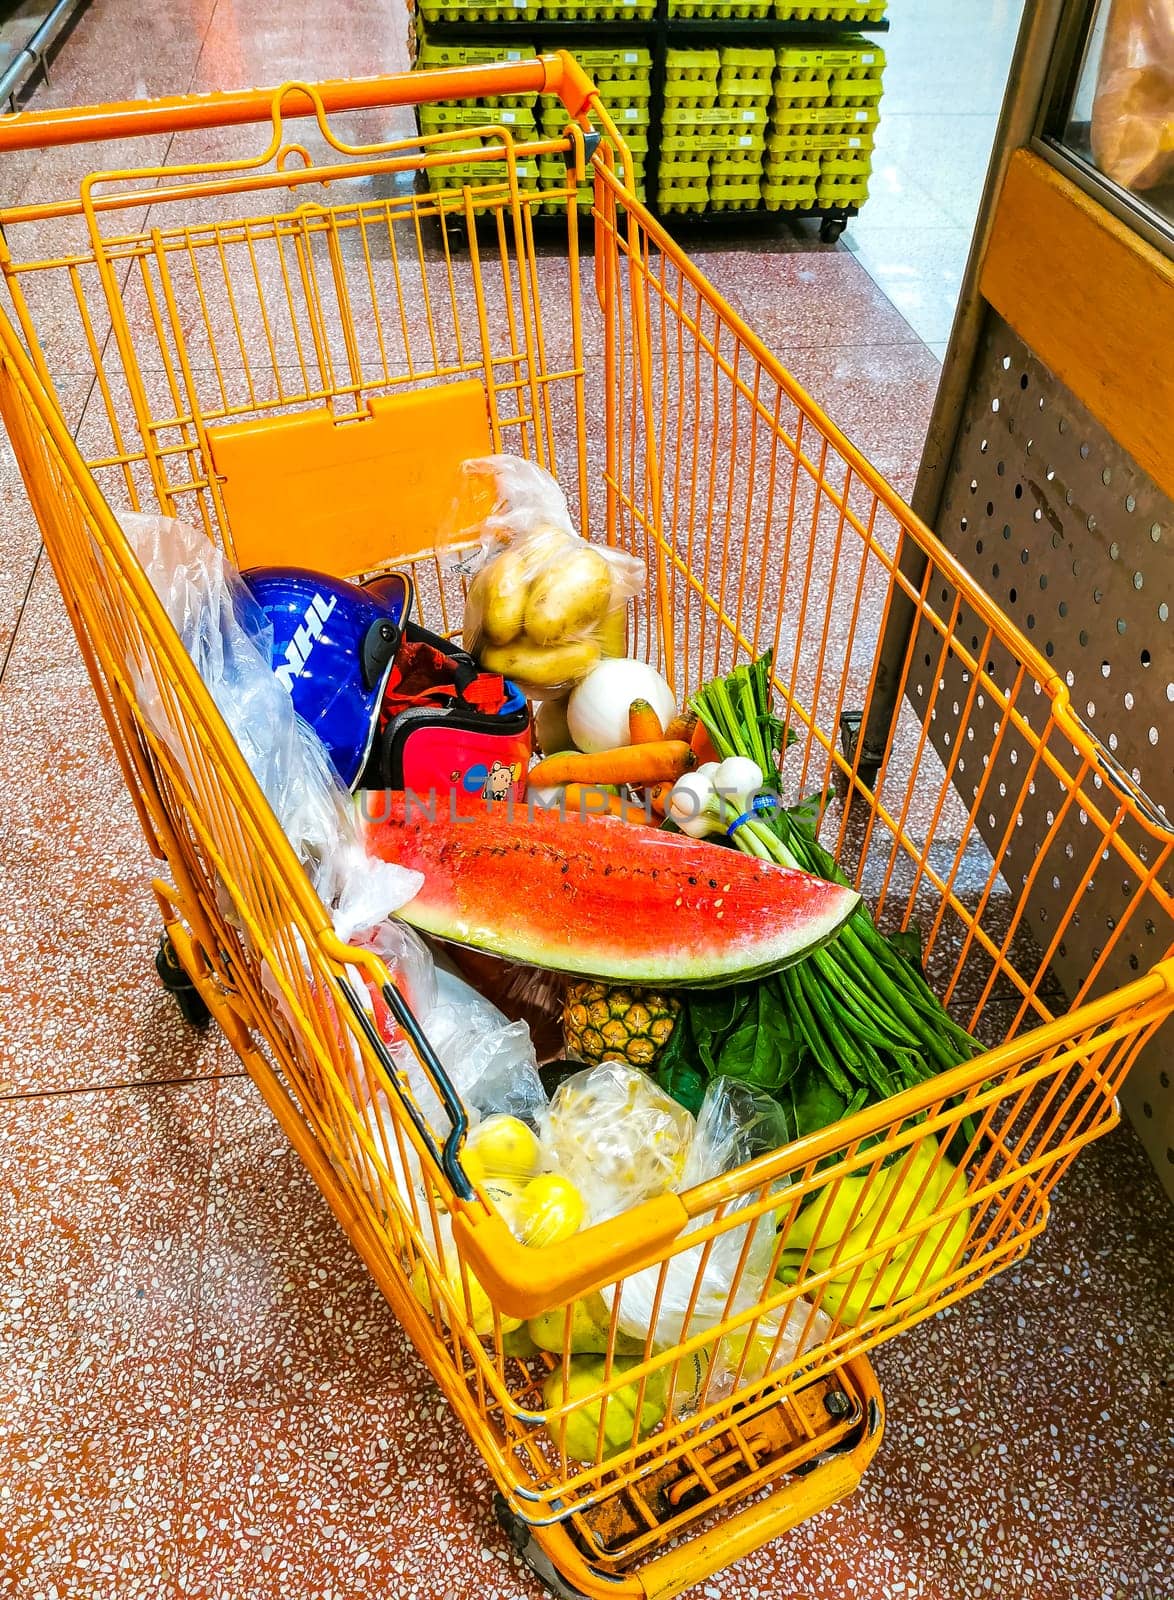 Supermarket from the inside Shelves Goods People Shopping carts Products Aisles in Playa del Carmen Quintana Roo Mexico.